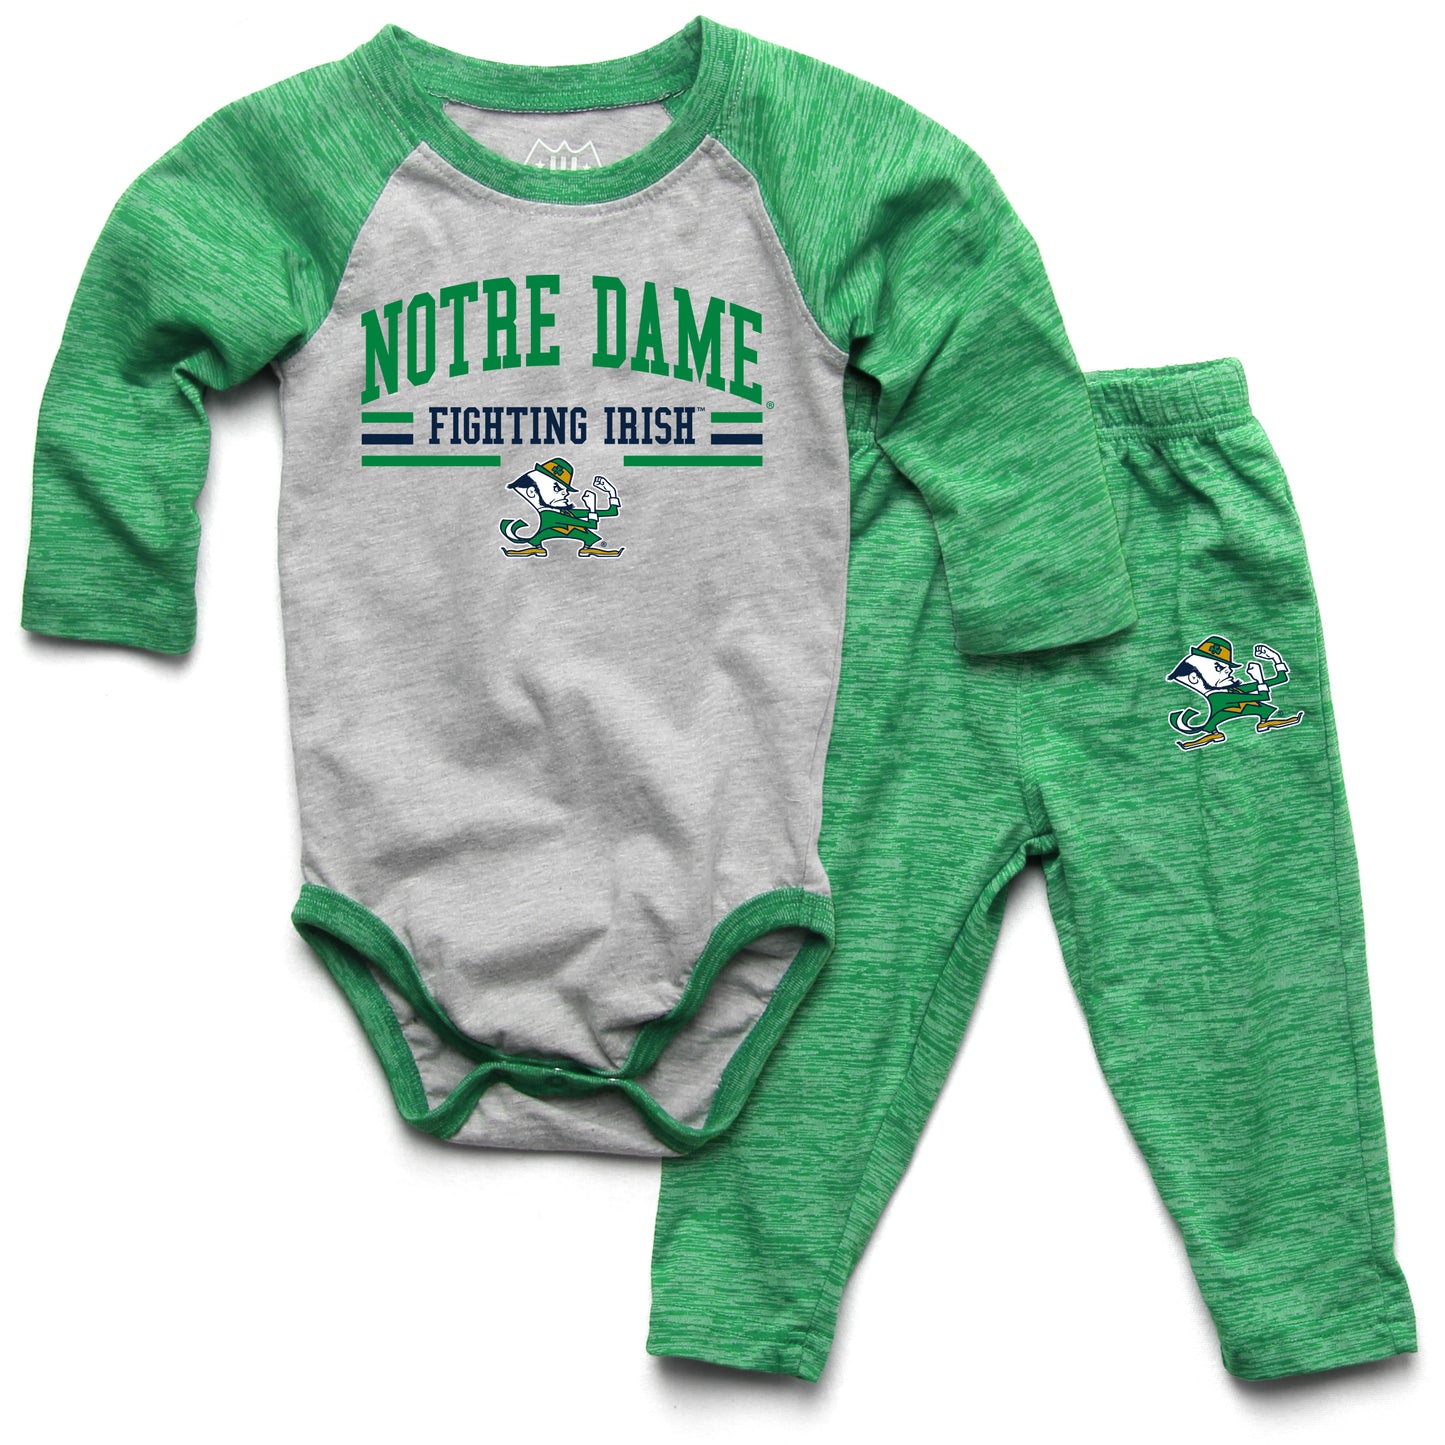 Notre Dame Fighting Irish Wes and Willy Baby College Team Hopper and Pant Set Green